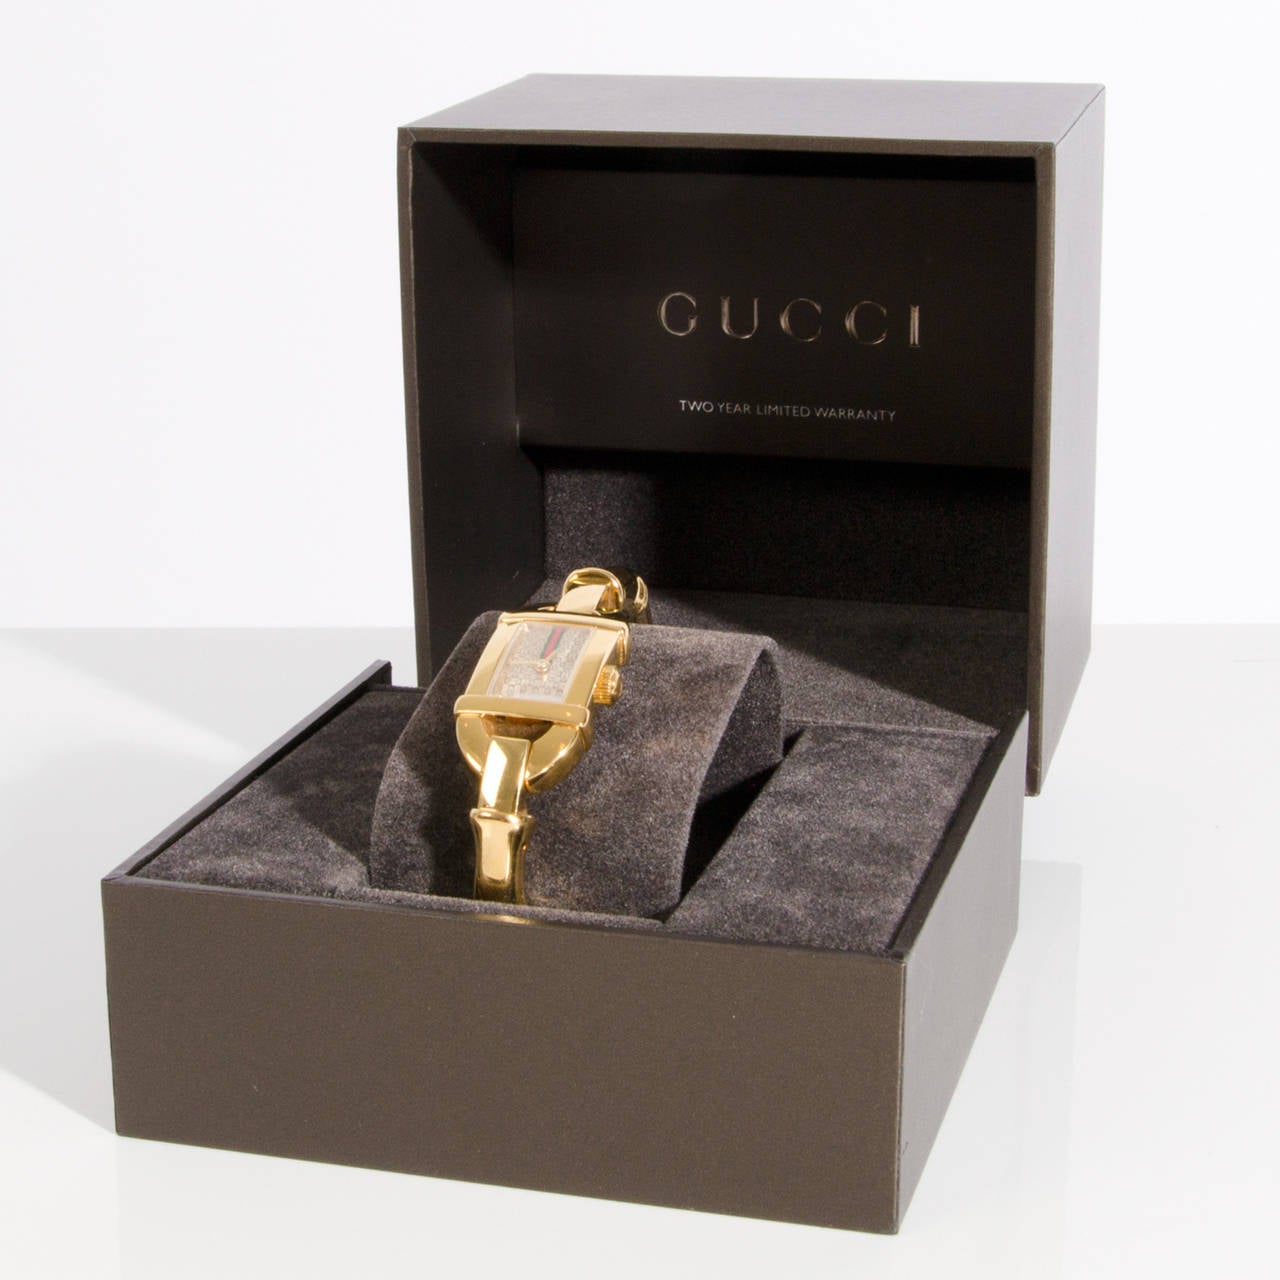 Gucci Bamboo Gold Tone Stainless Steel womens watch with battery Powered Quartz Movement Swiss Made,
Comes with box.